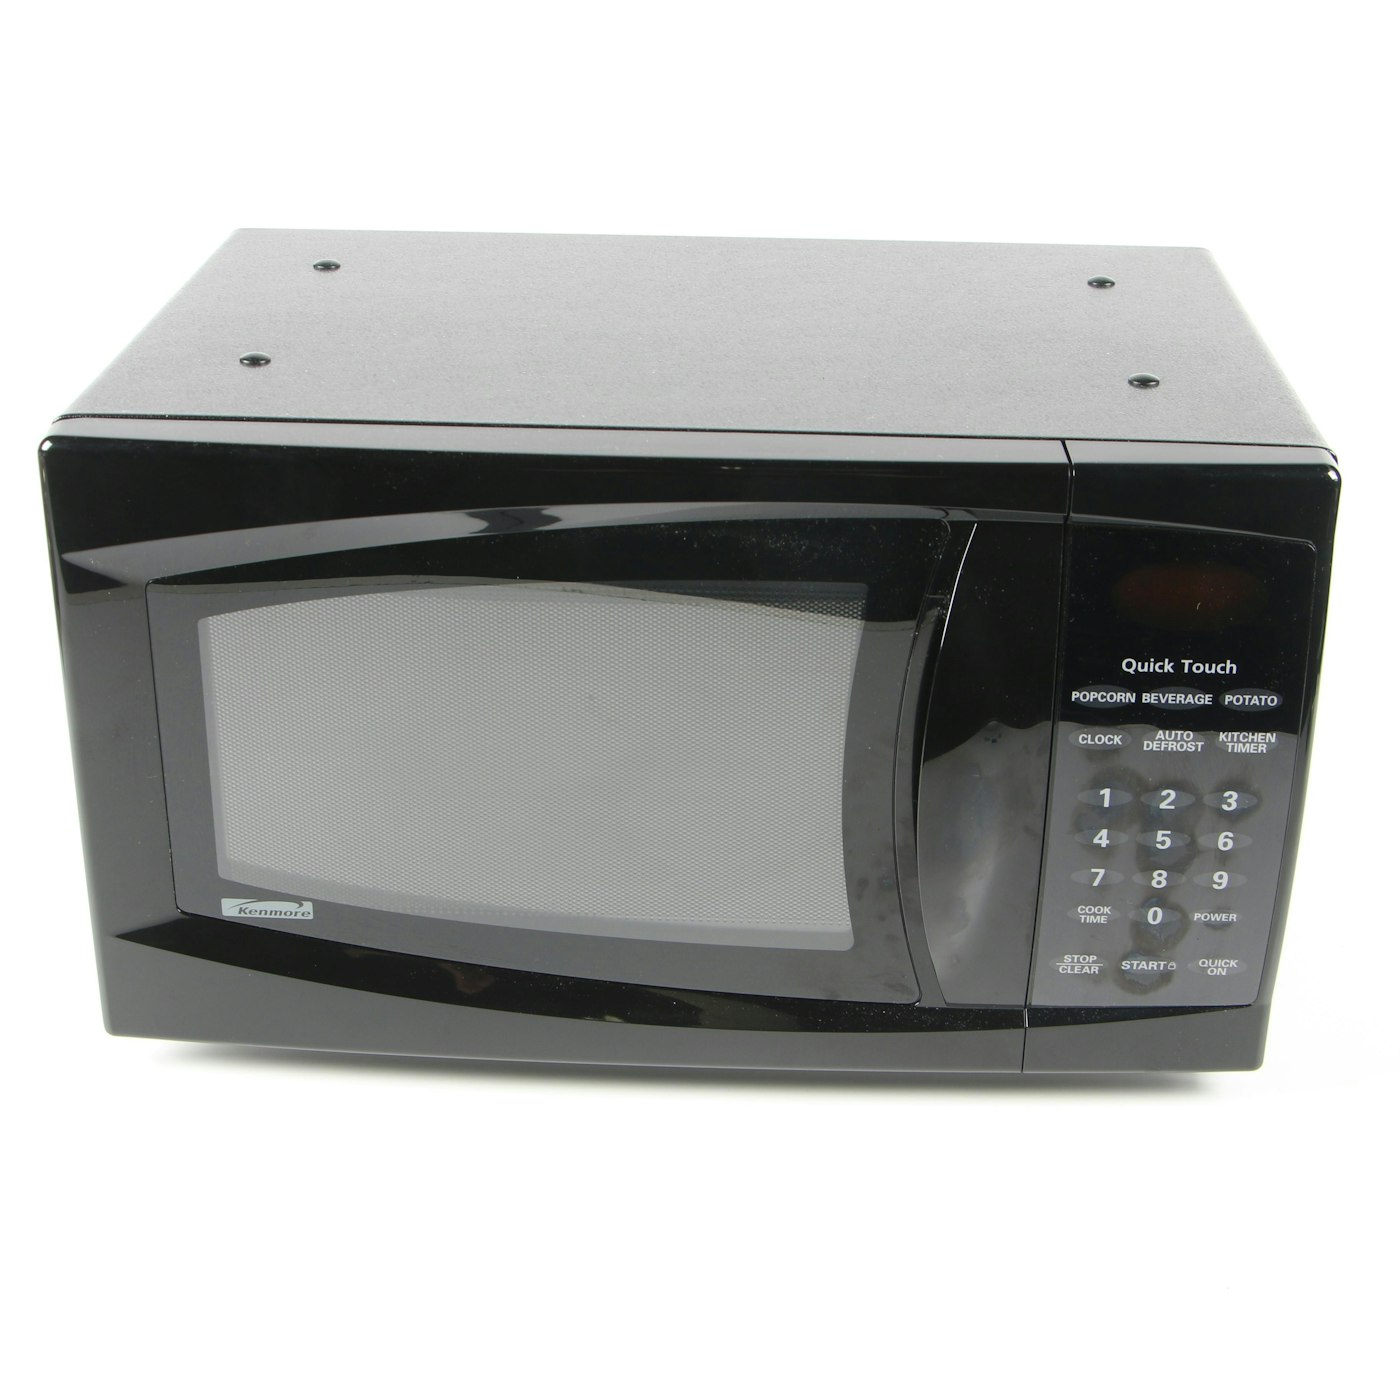 Kenmore Model 721 Quick Touch Microwave, 2000 | EBTH